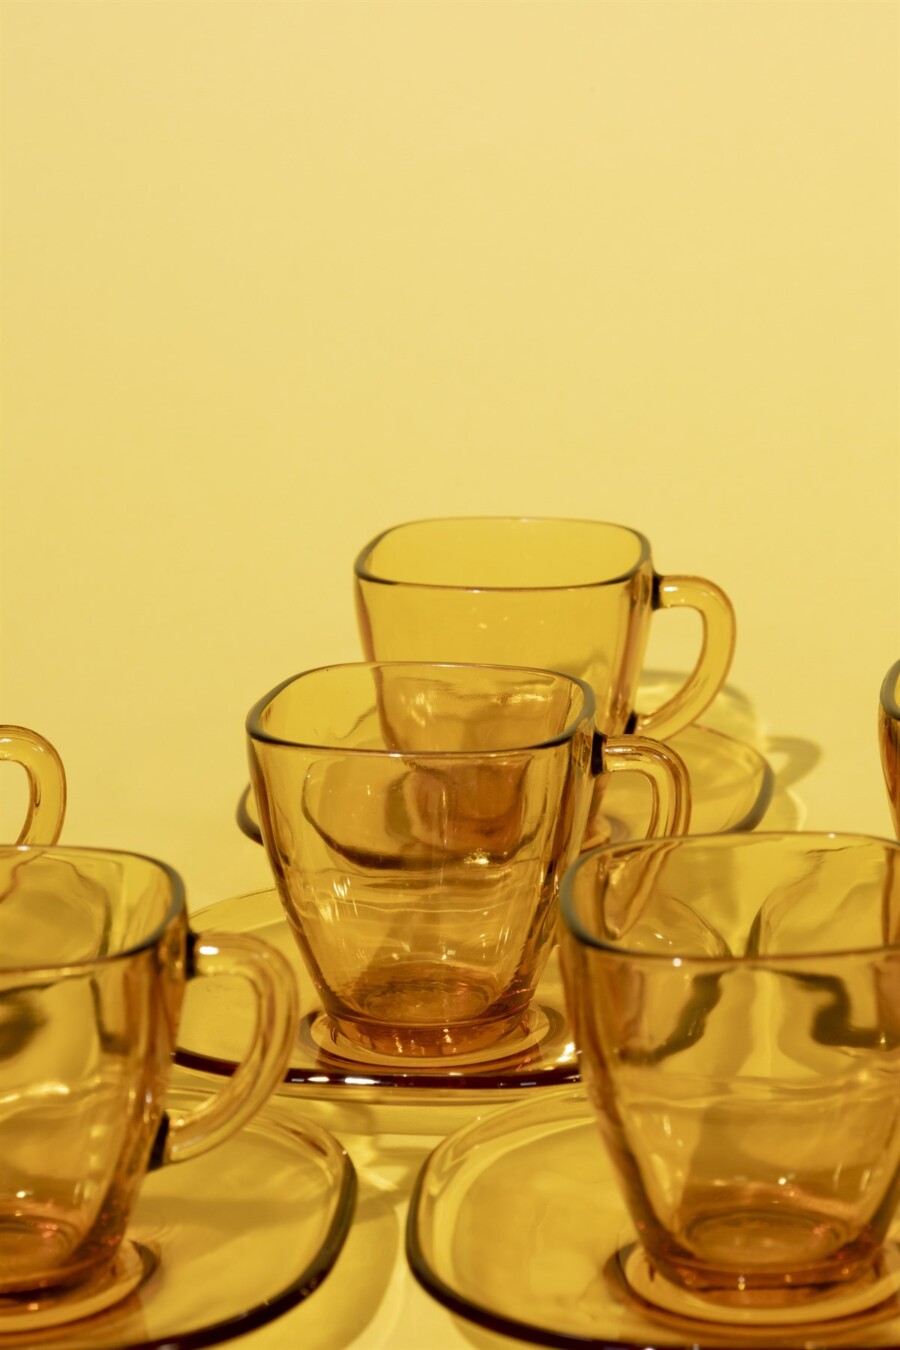 Vintage French amber glass coffee set 60s